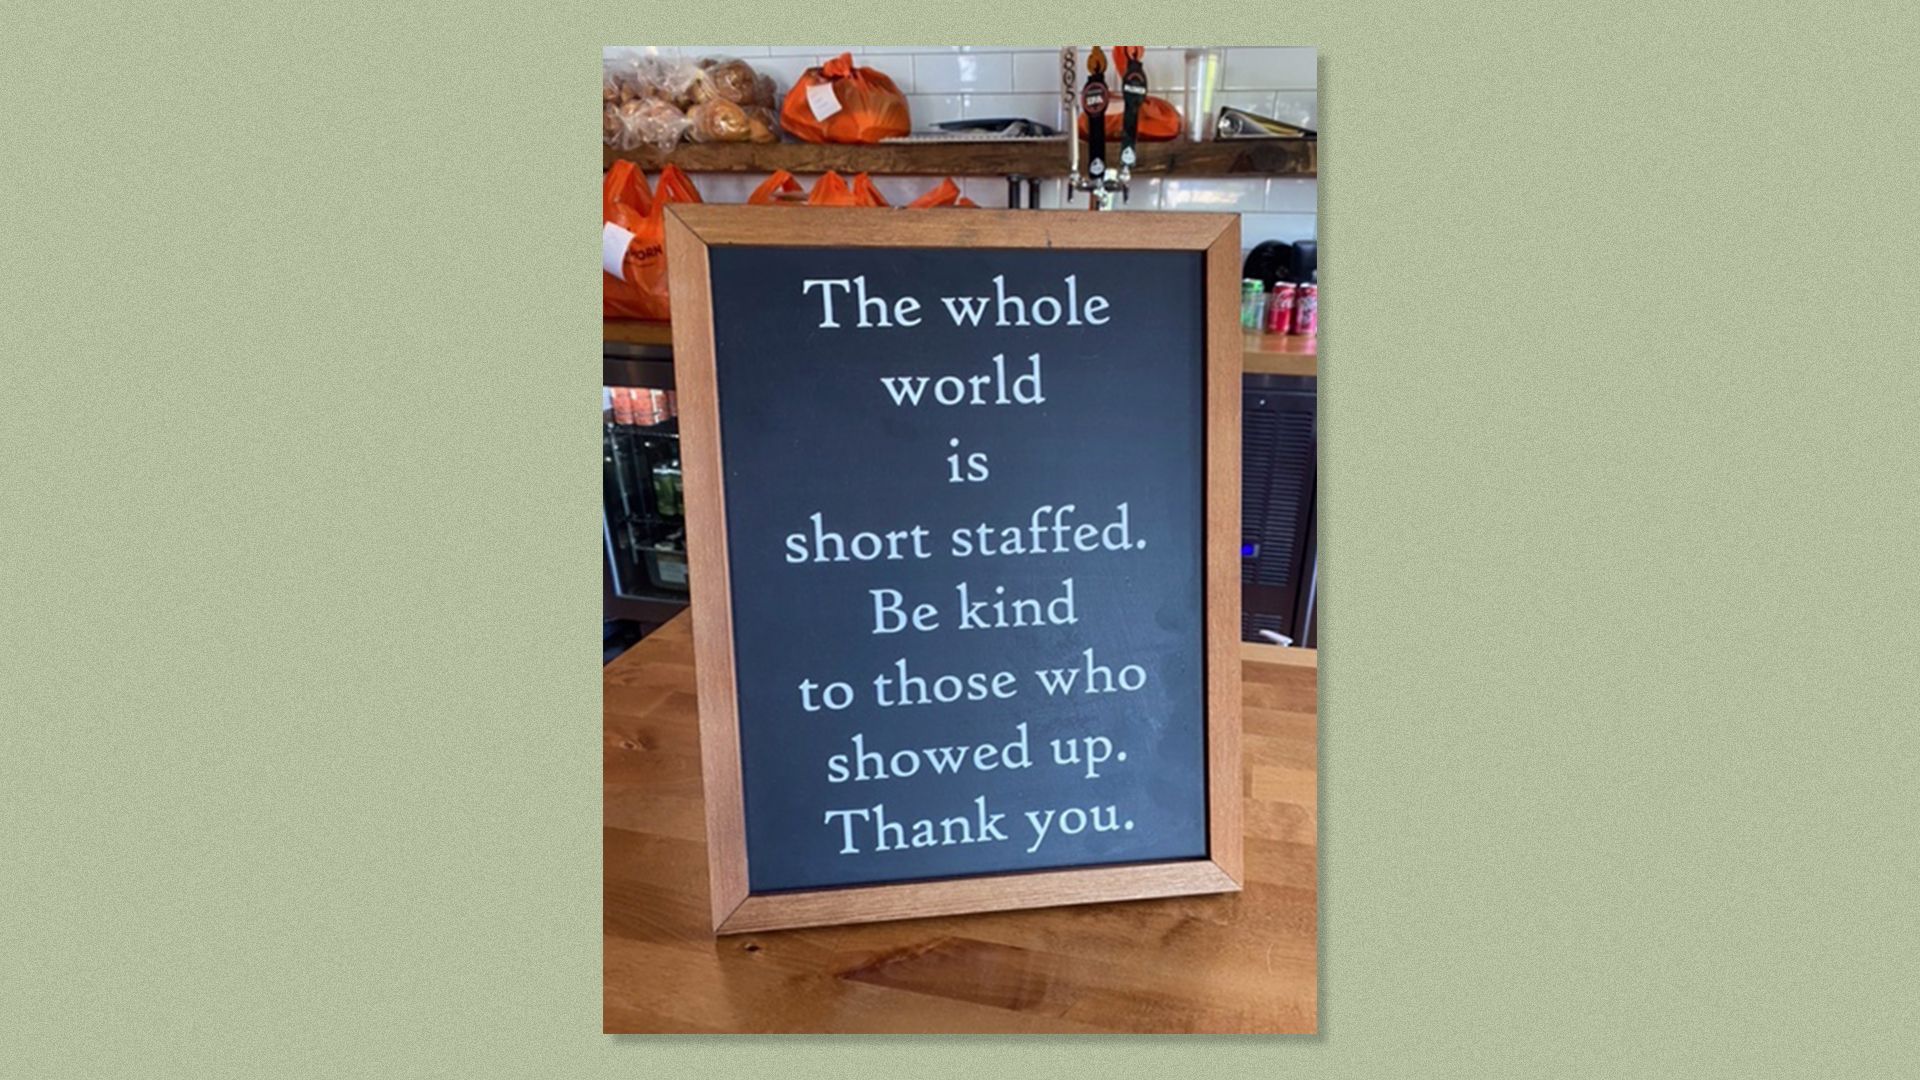 A chalkboard in a restaurant reminds customers that everyone is short-staffed these days.